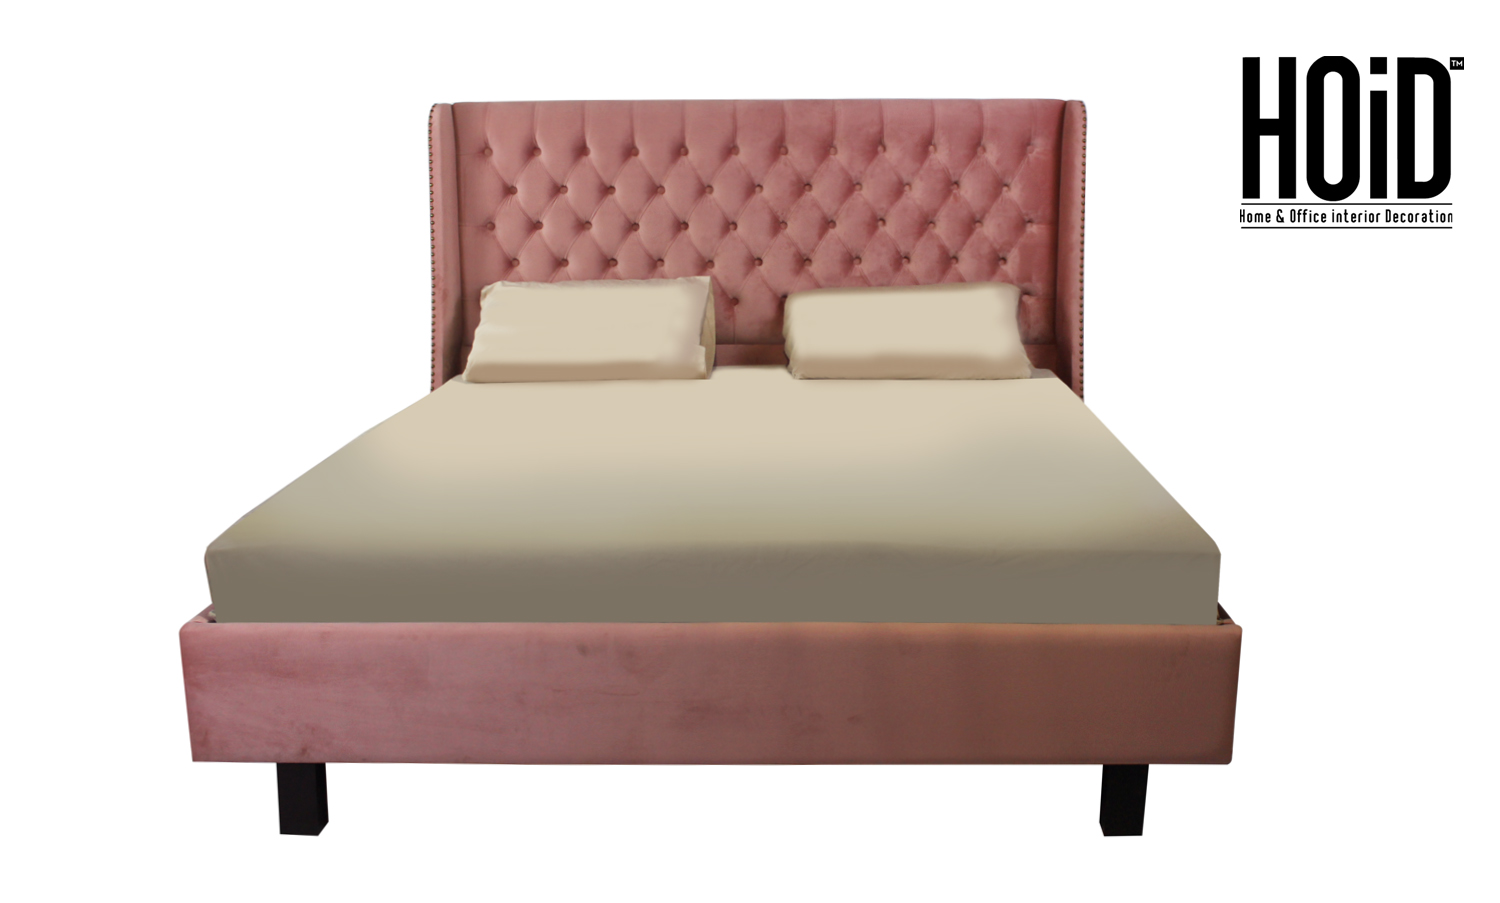 snow-tufted-bed-03-1.jpg